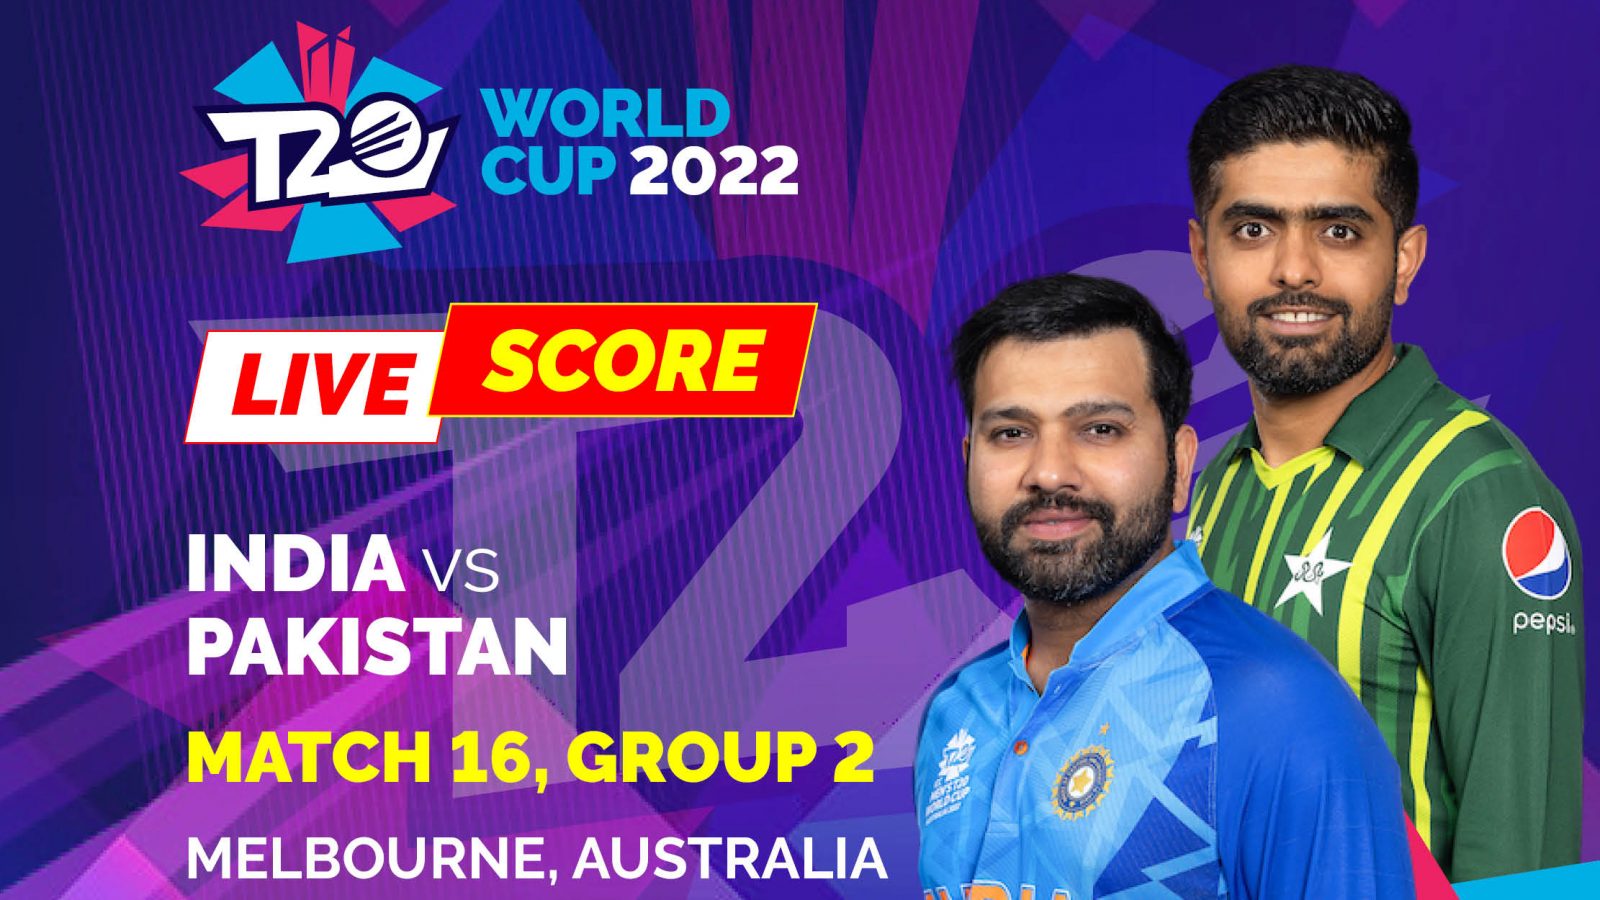 News About India T20 World Cup And Pakistan Ind Vs Pak Update At Melbourne Cricket Ground 1 166652034216x9 